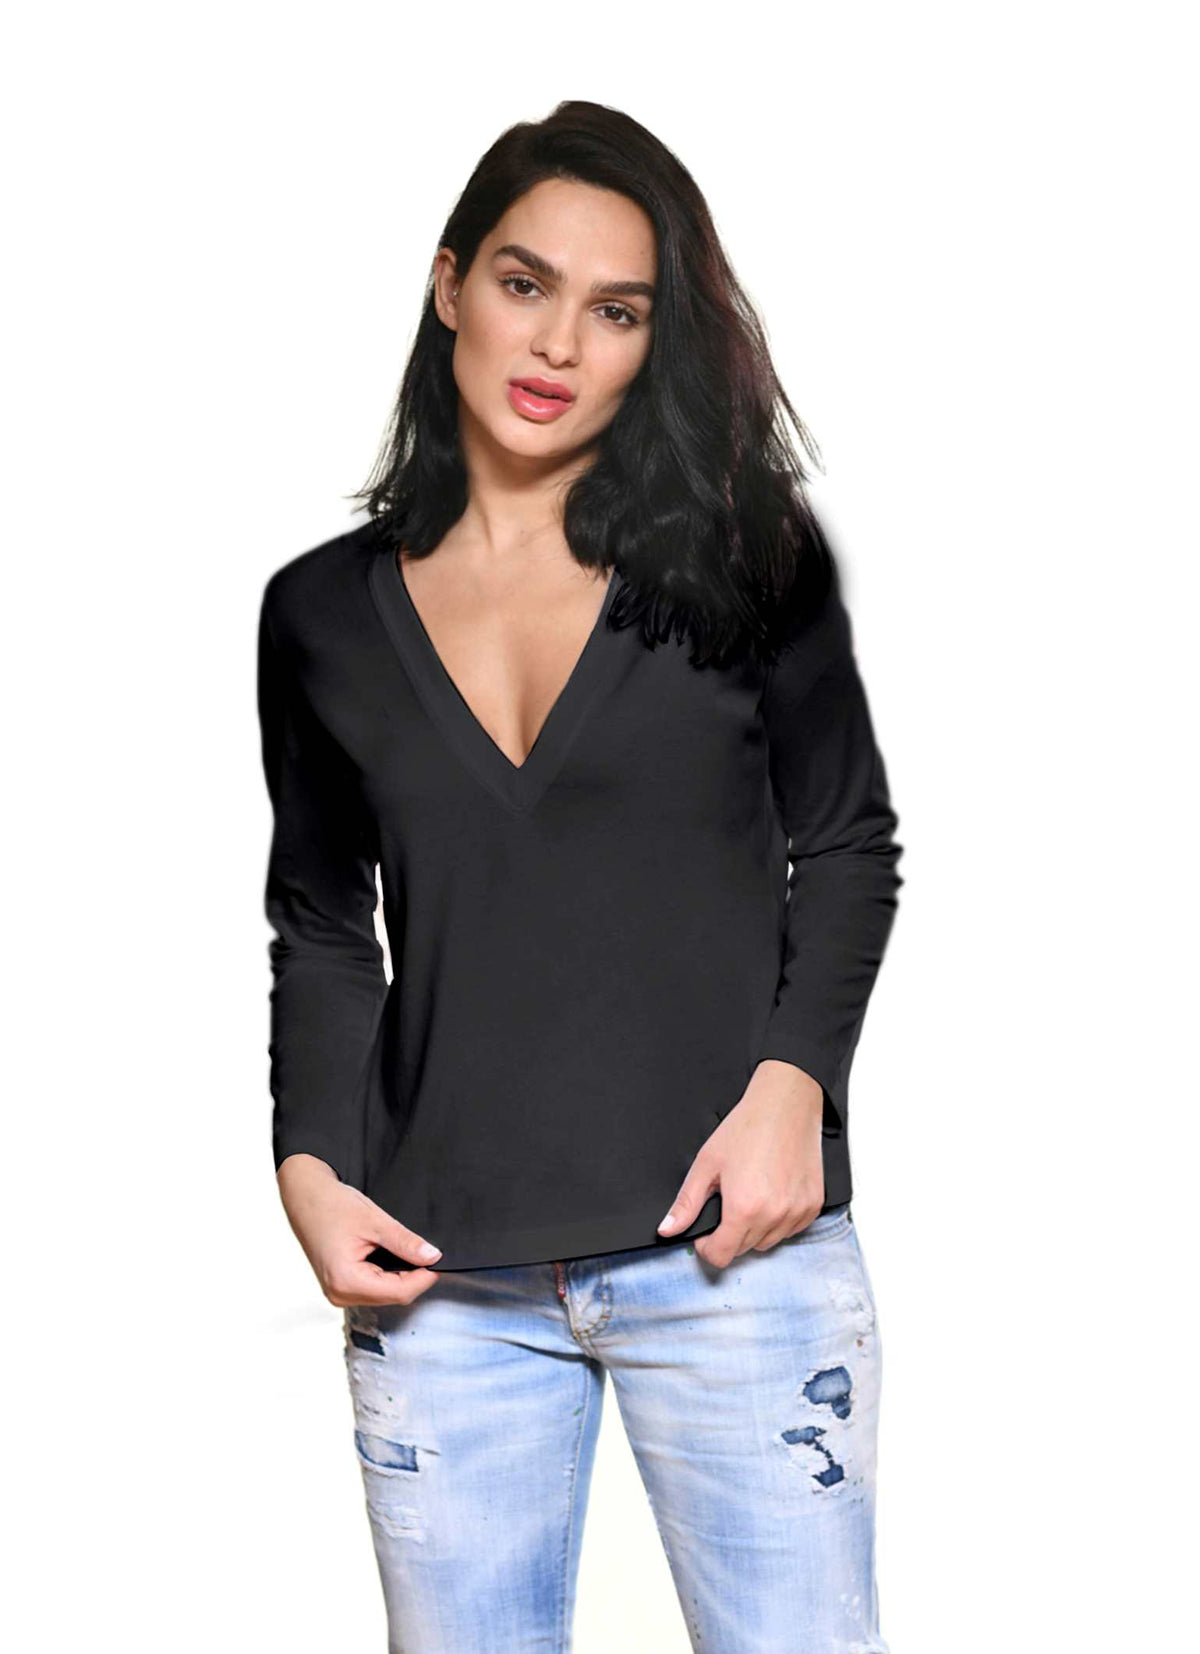 Black Carmen Sol long sleeve tee in round neck paired with jeans